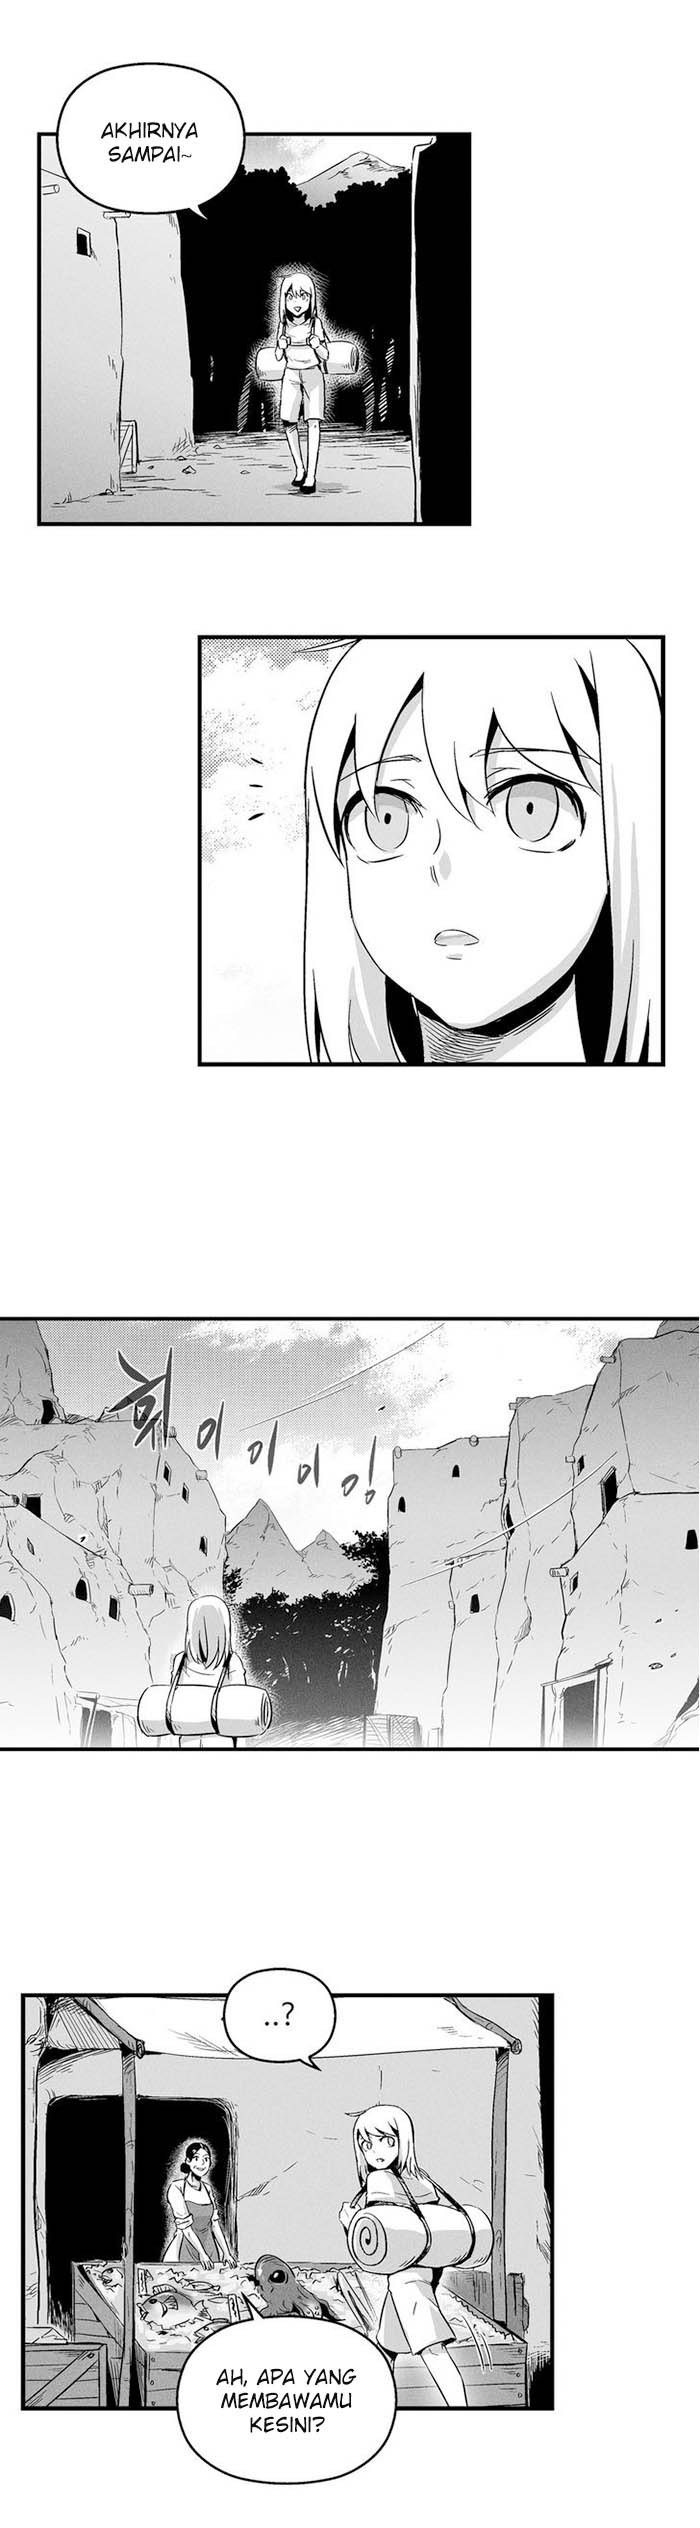 White Epic Chapter 07